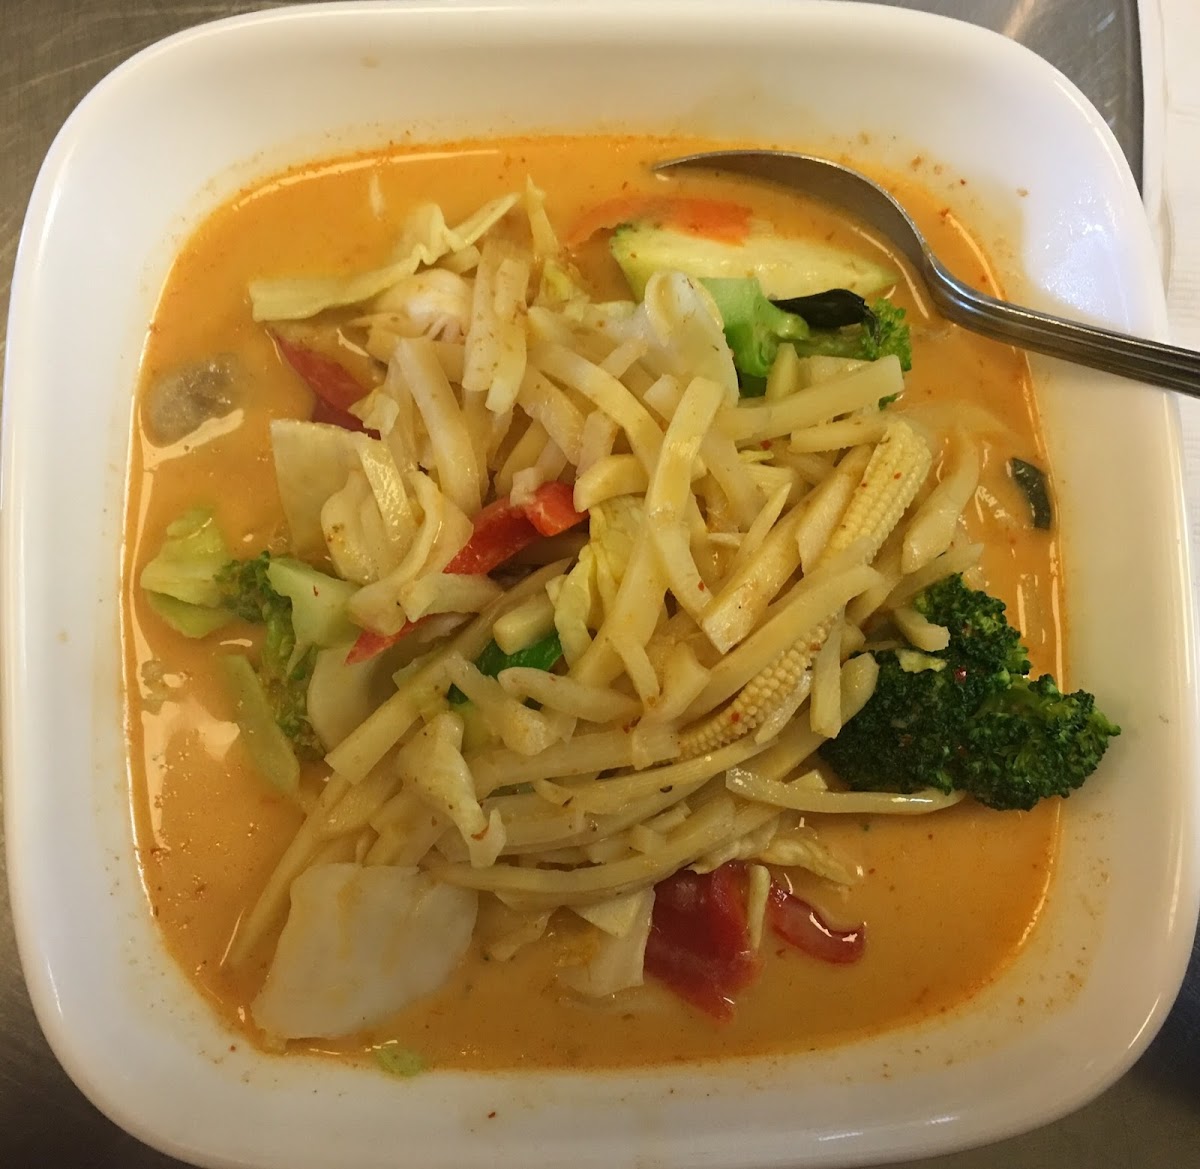 Vegetarian Red Curry with white rice (not shown).